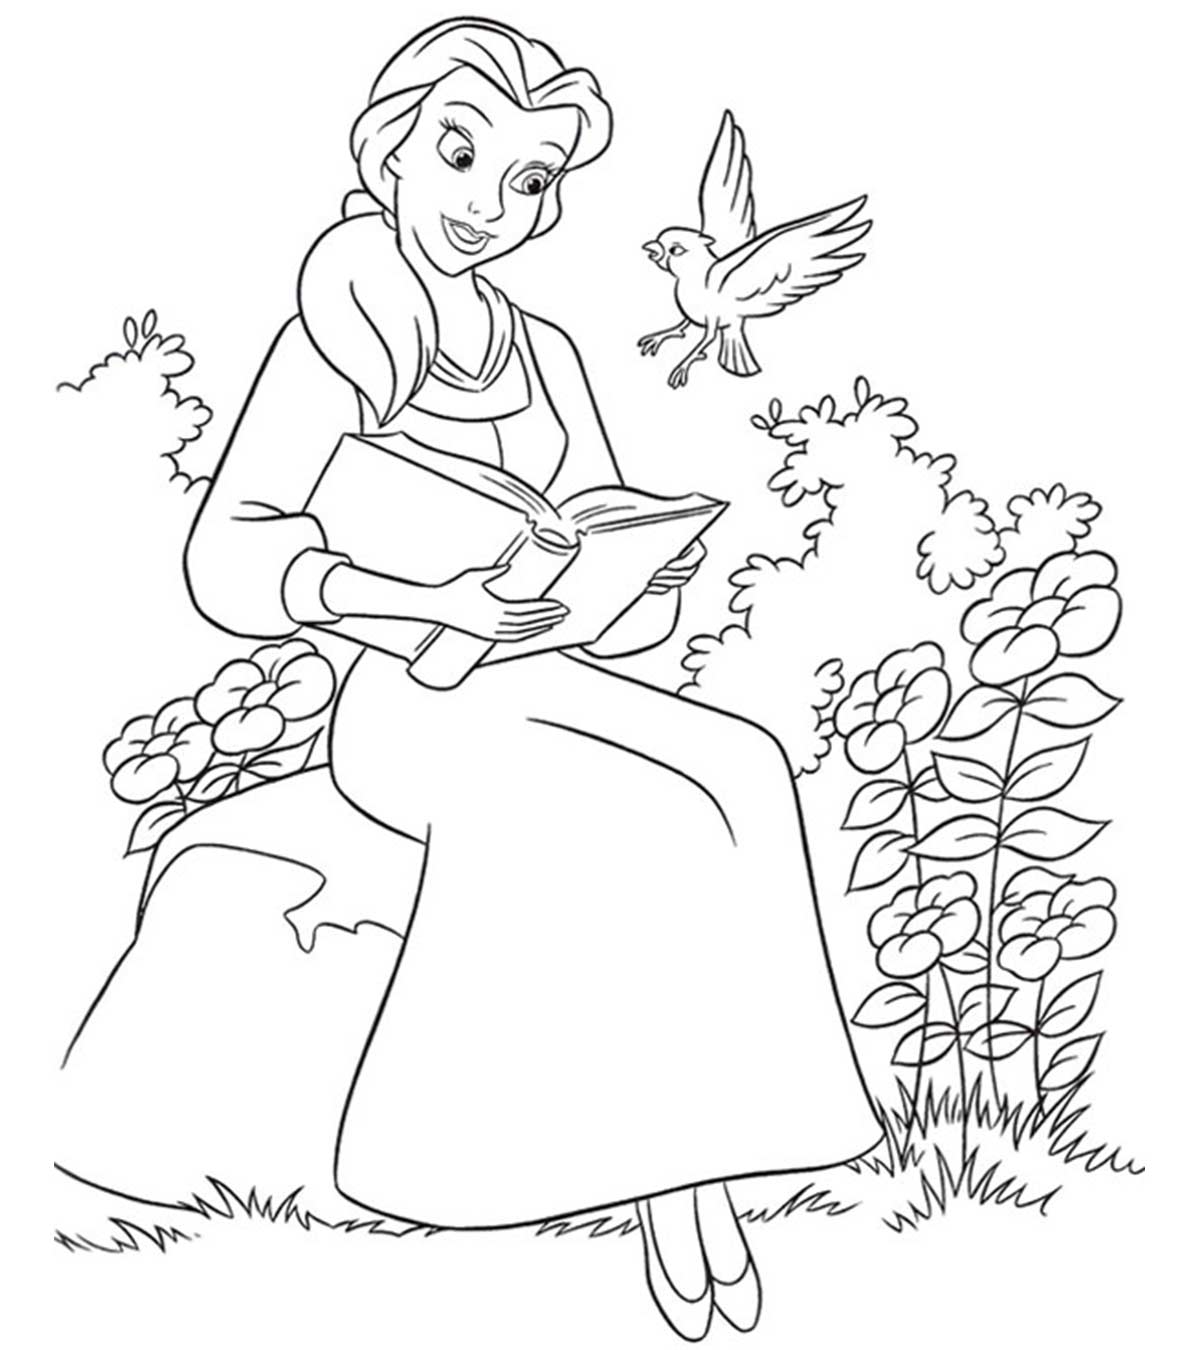 10 Wonderful Beauty And The Beast Coloring Pages For Your Toddler_image